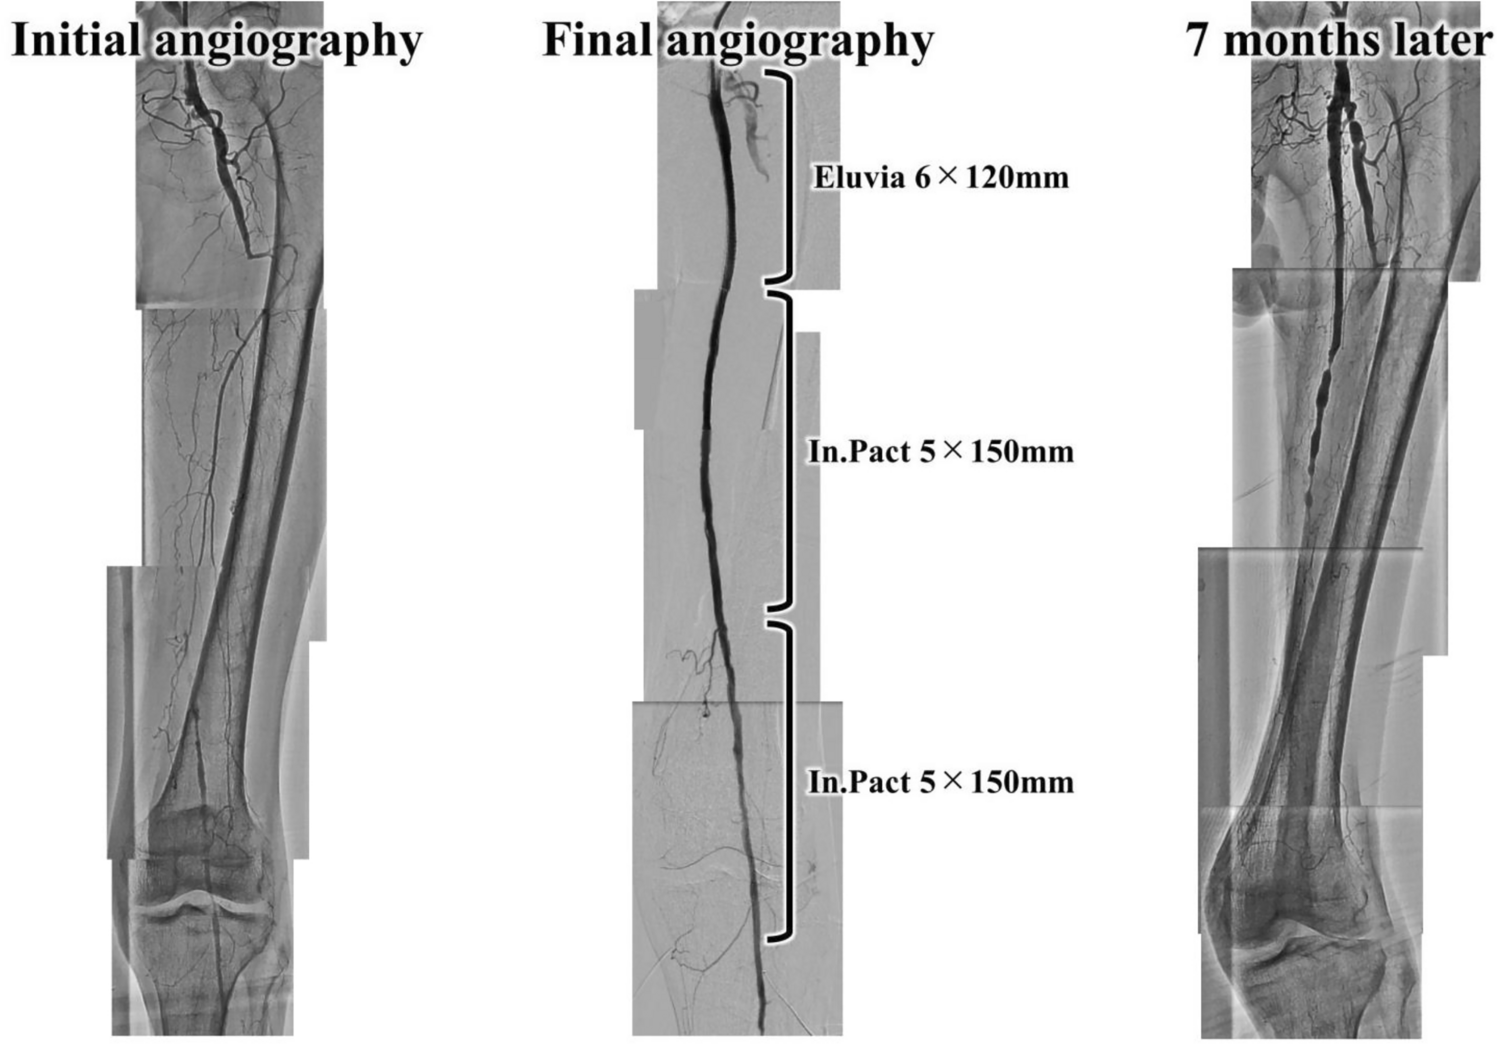 Evaluation of the efficacy of combined device strategies for long femoropopliteal artery disease